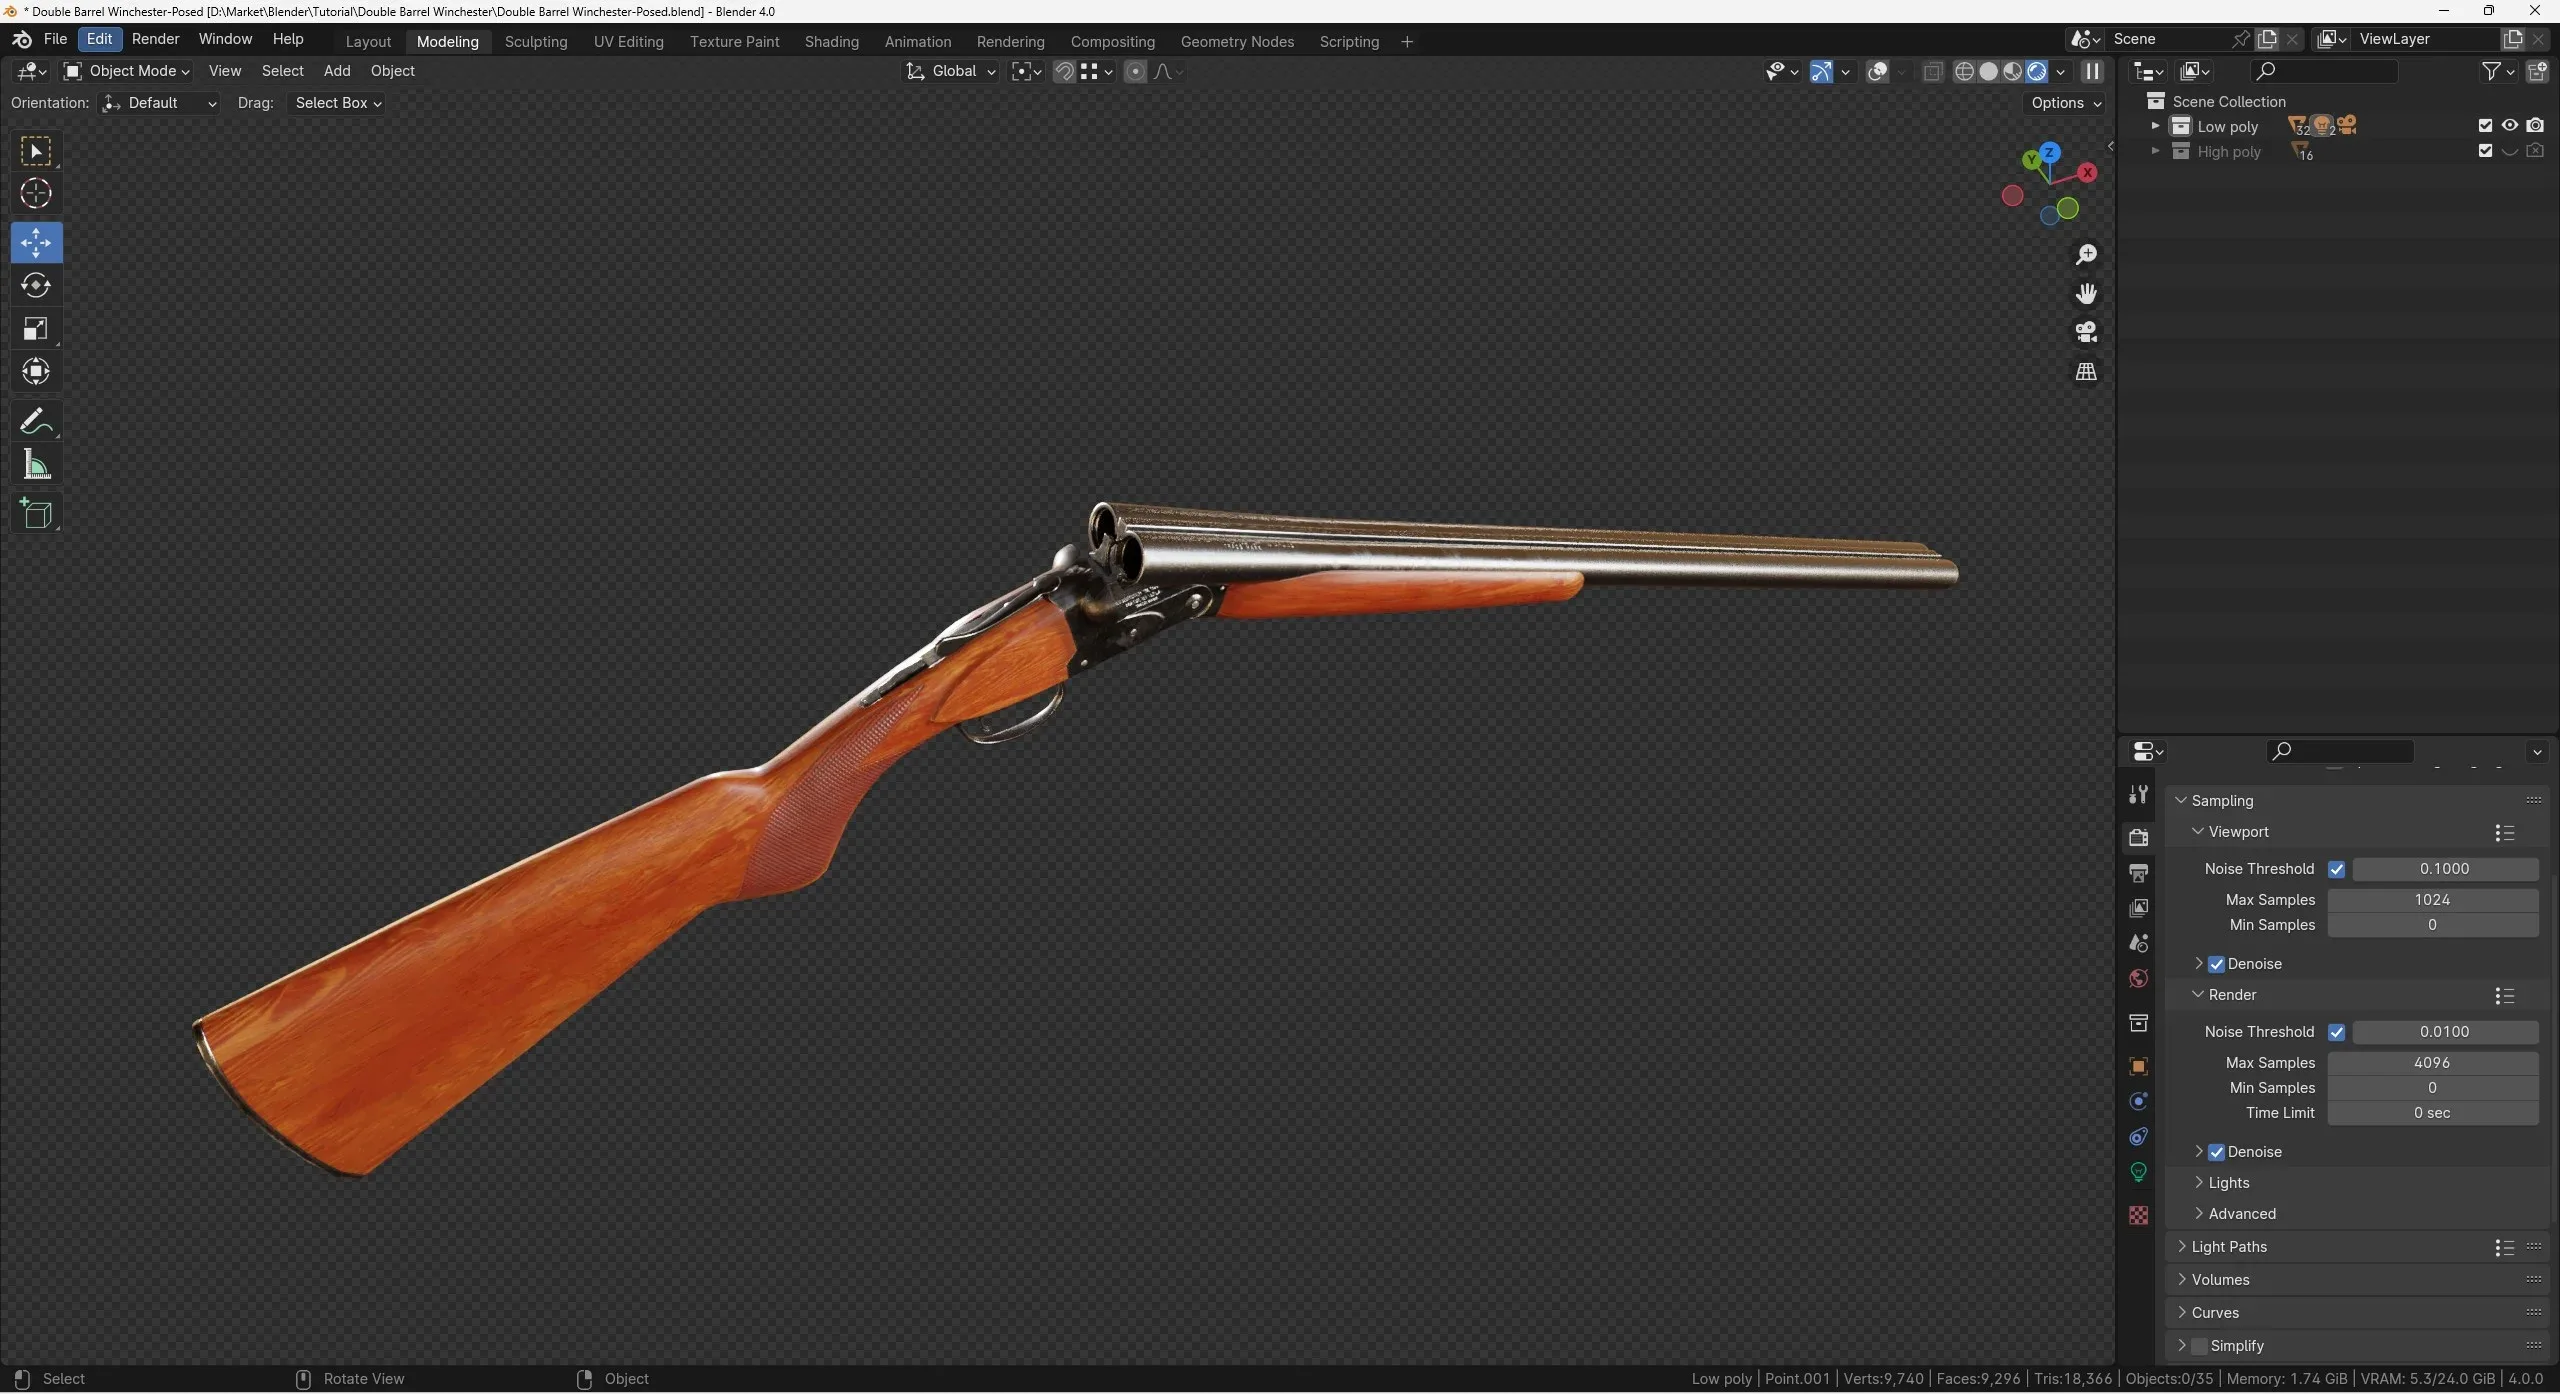 Creating Double Barrel Winchester inside Blender and Substance 3D Painter